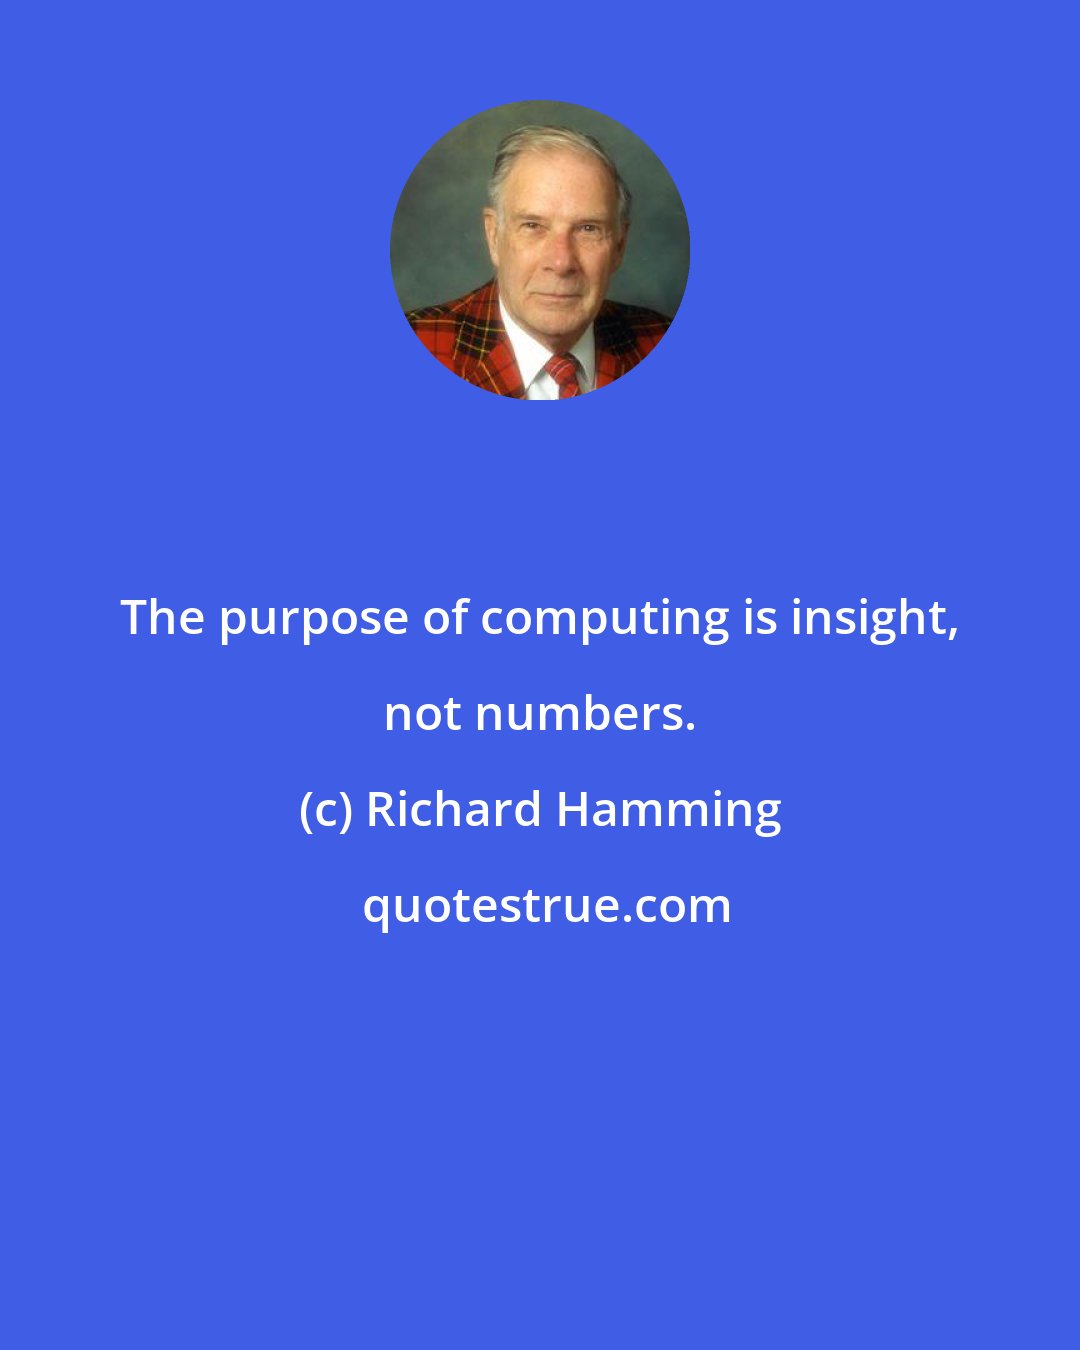 Richard Hamming: The purpose of computing is insight, not numbers.